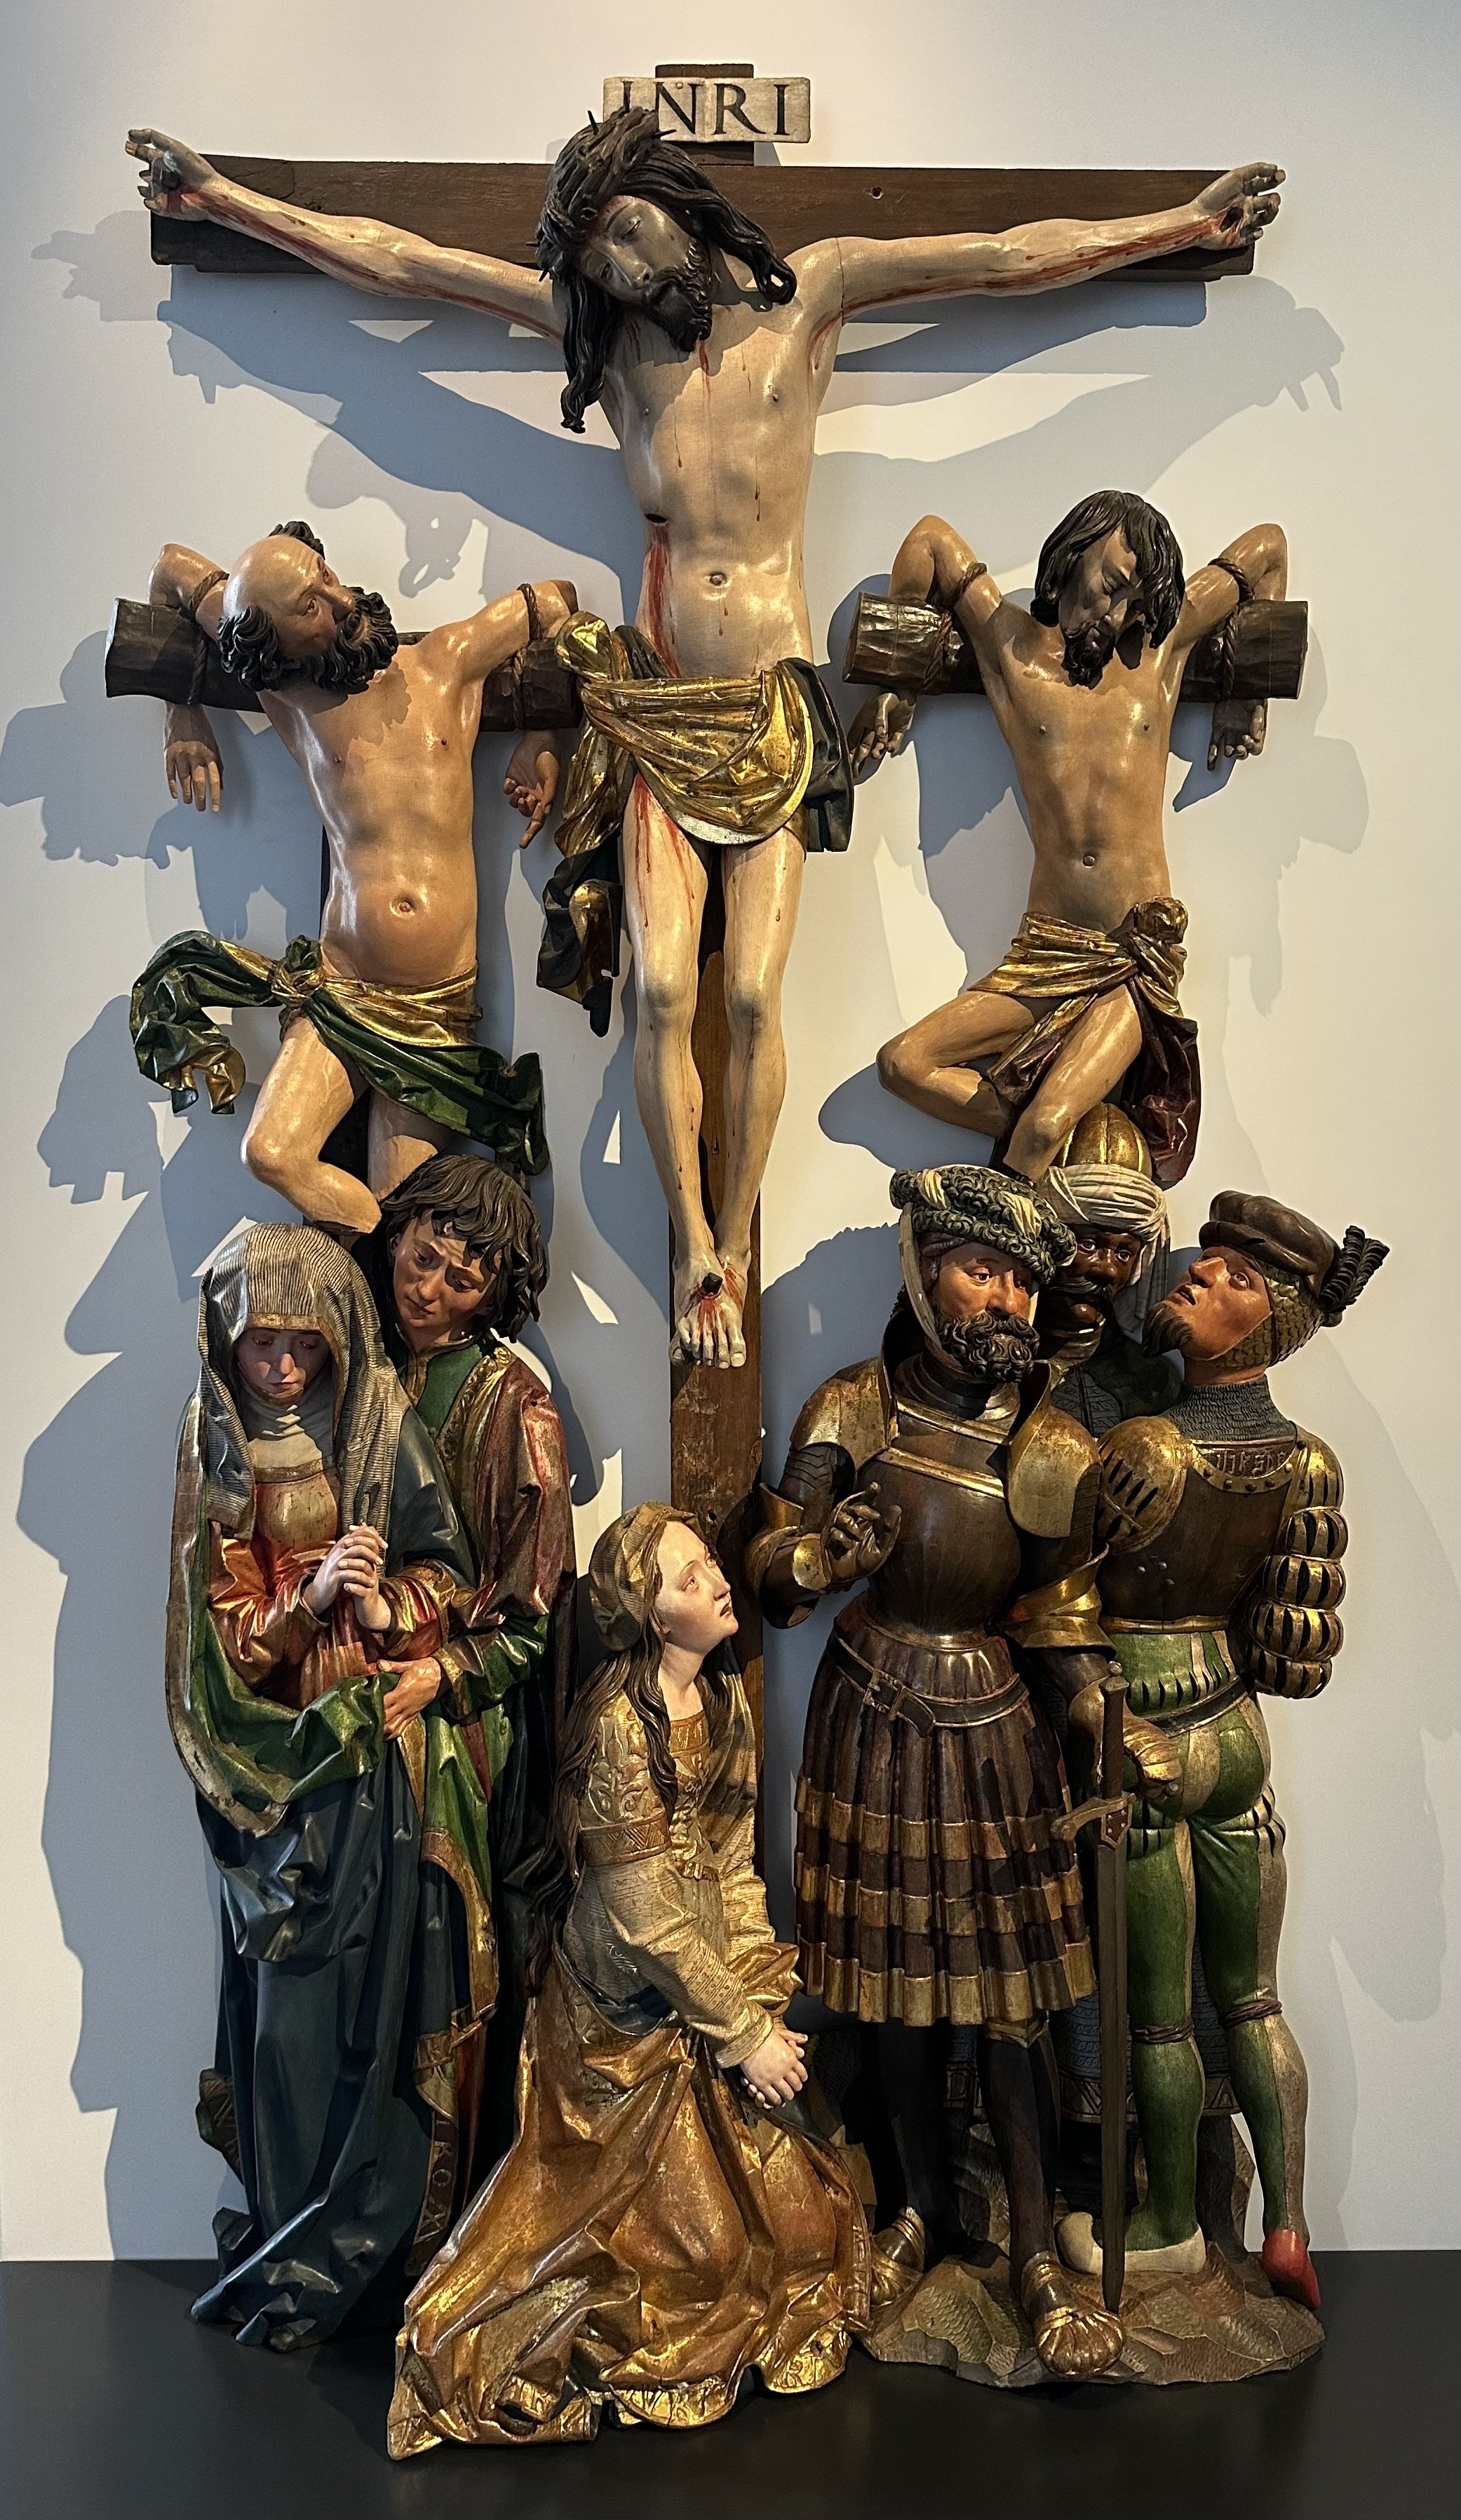 1520 Passion Relief with Crucifixion of Christ by Niclaus Weckmann Landesmuseum Wurttemberg.jpeg